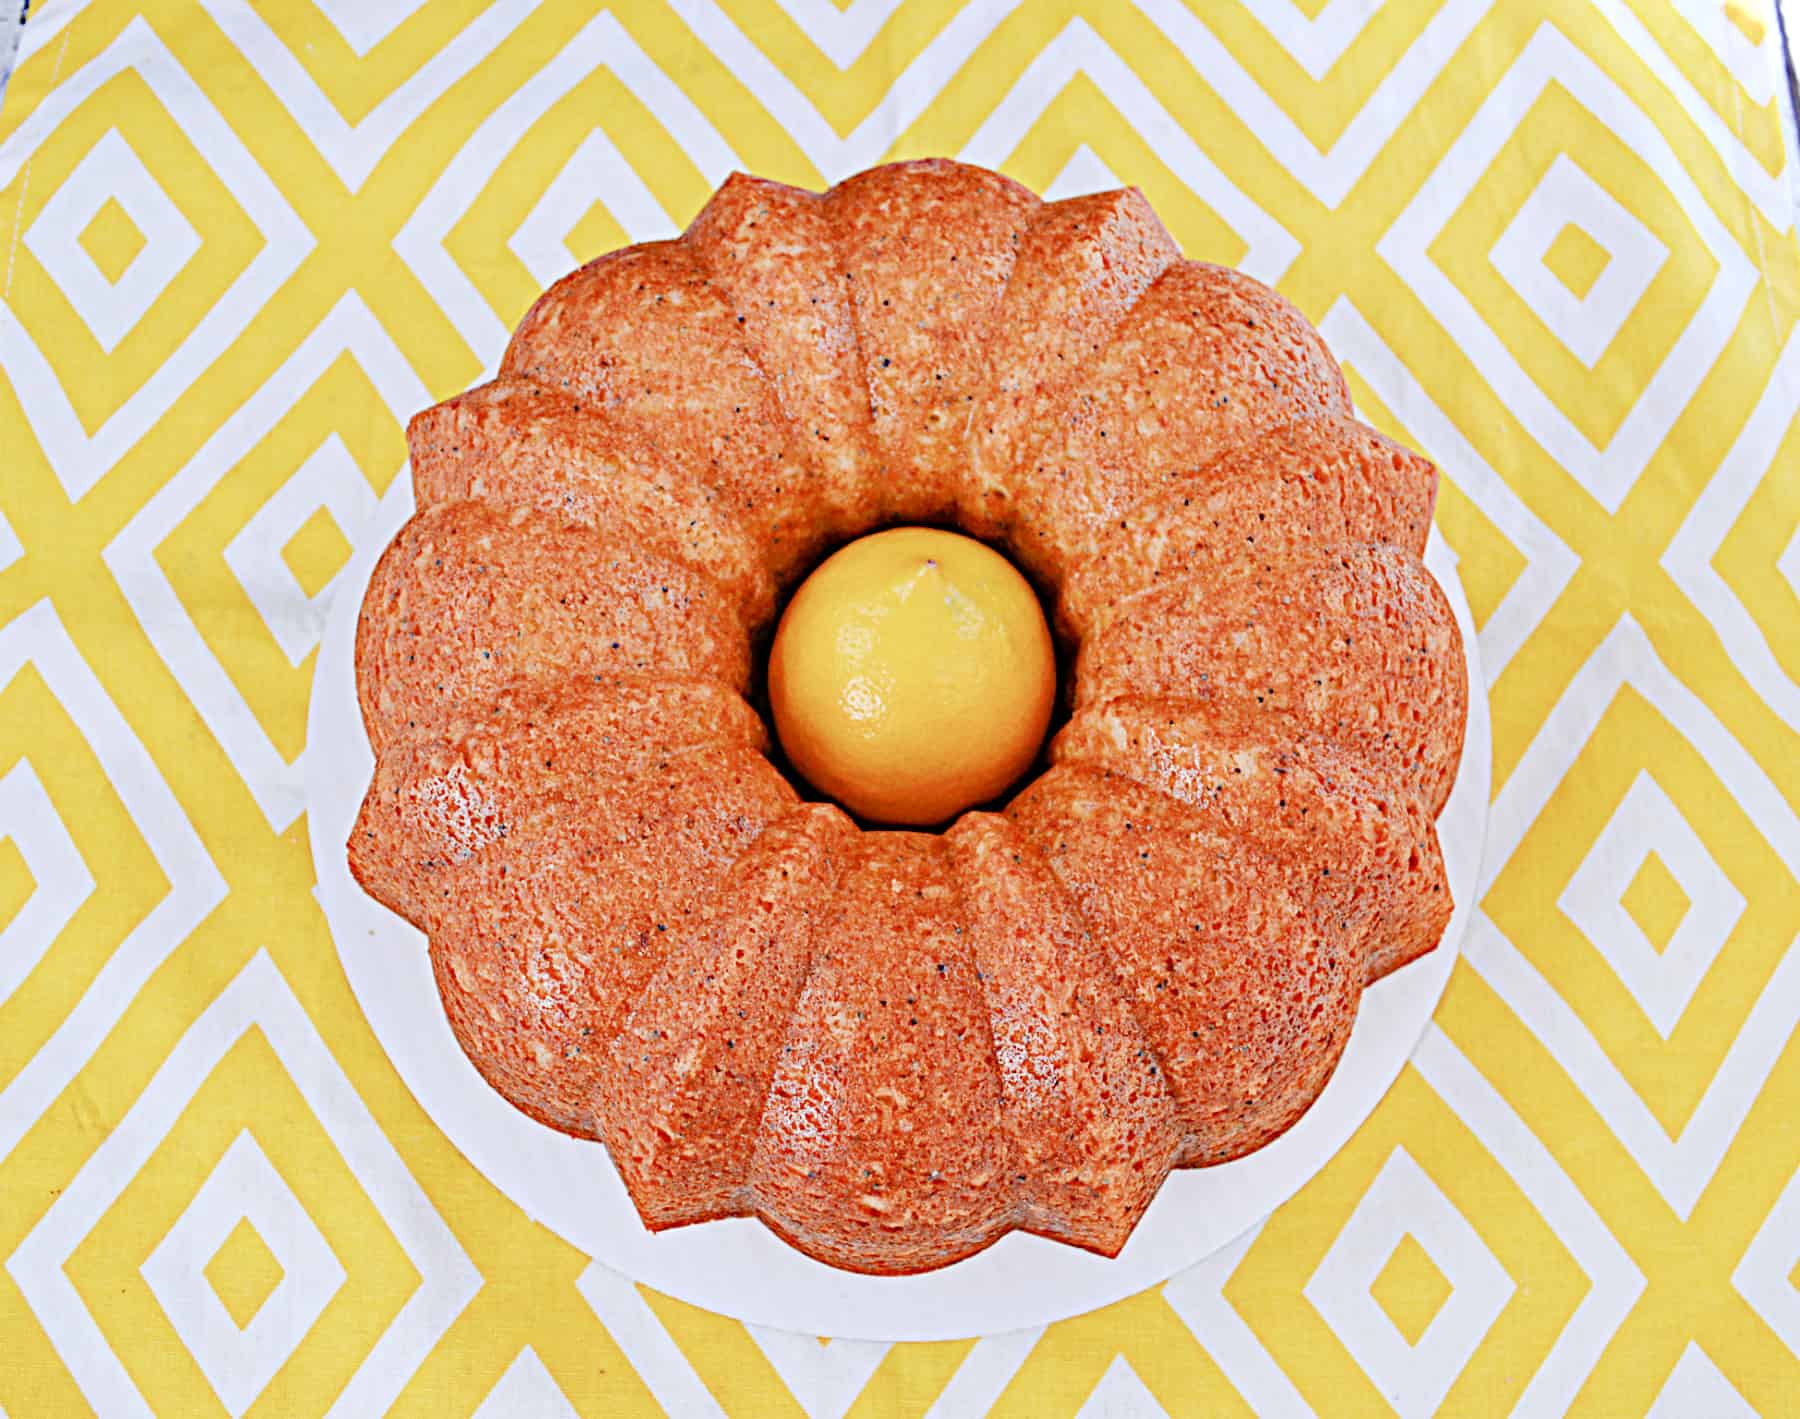 A golden brown Bundt Cake with a lemon in the middle.